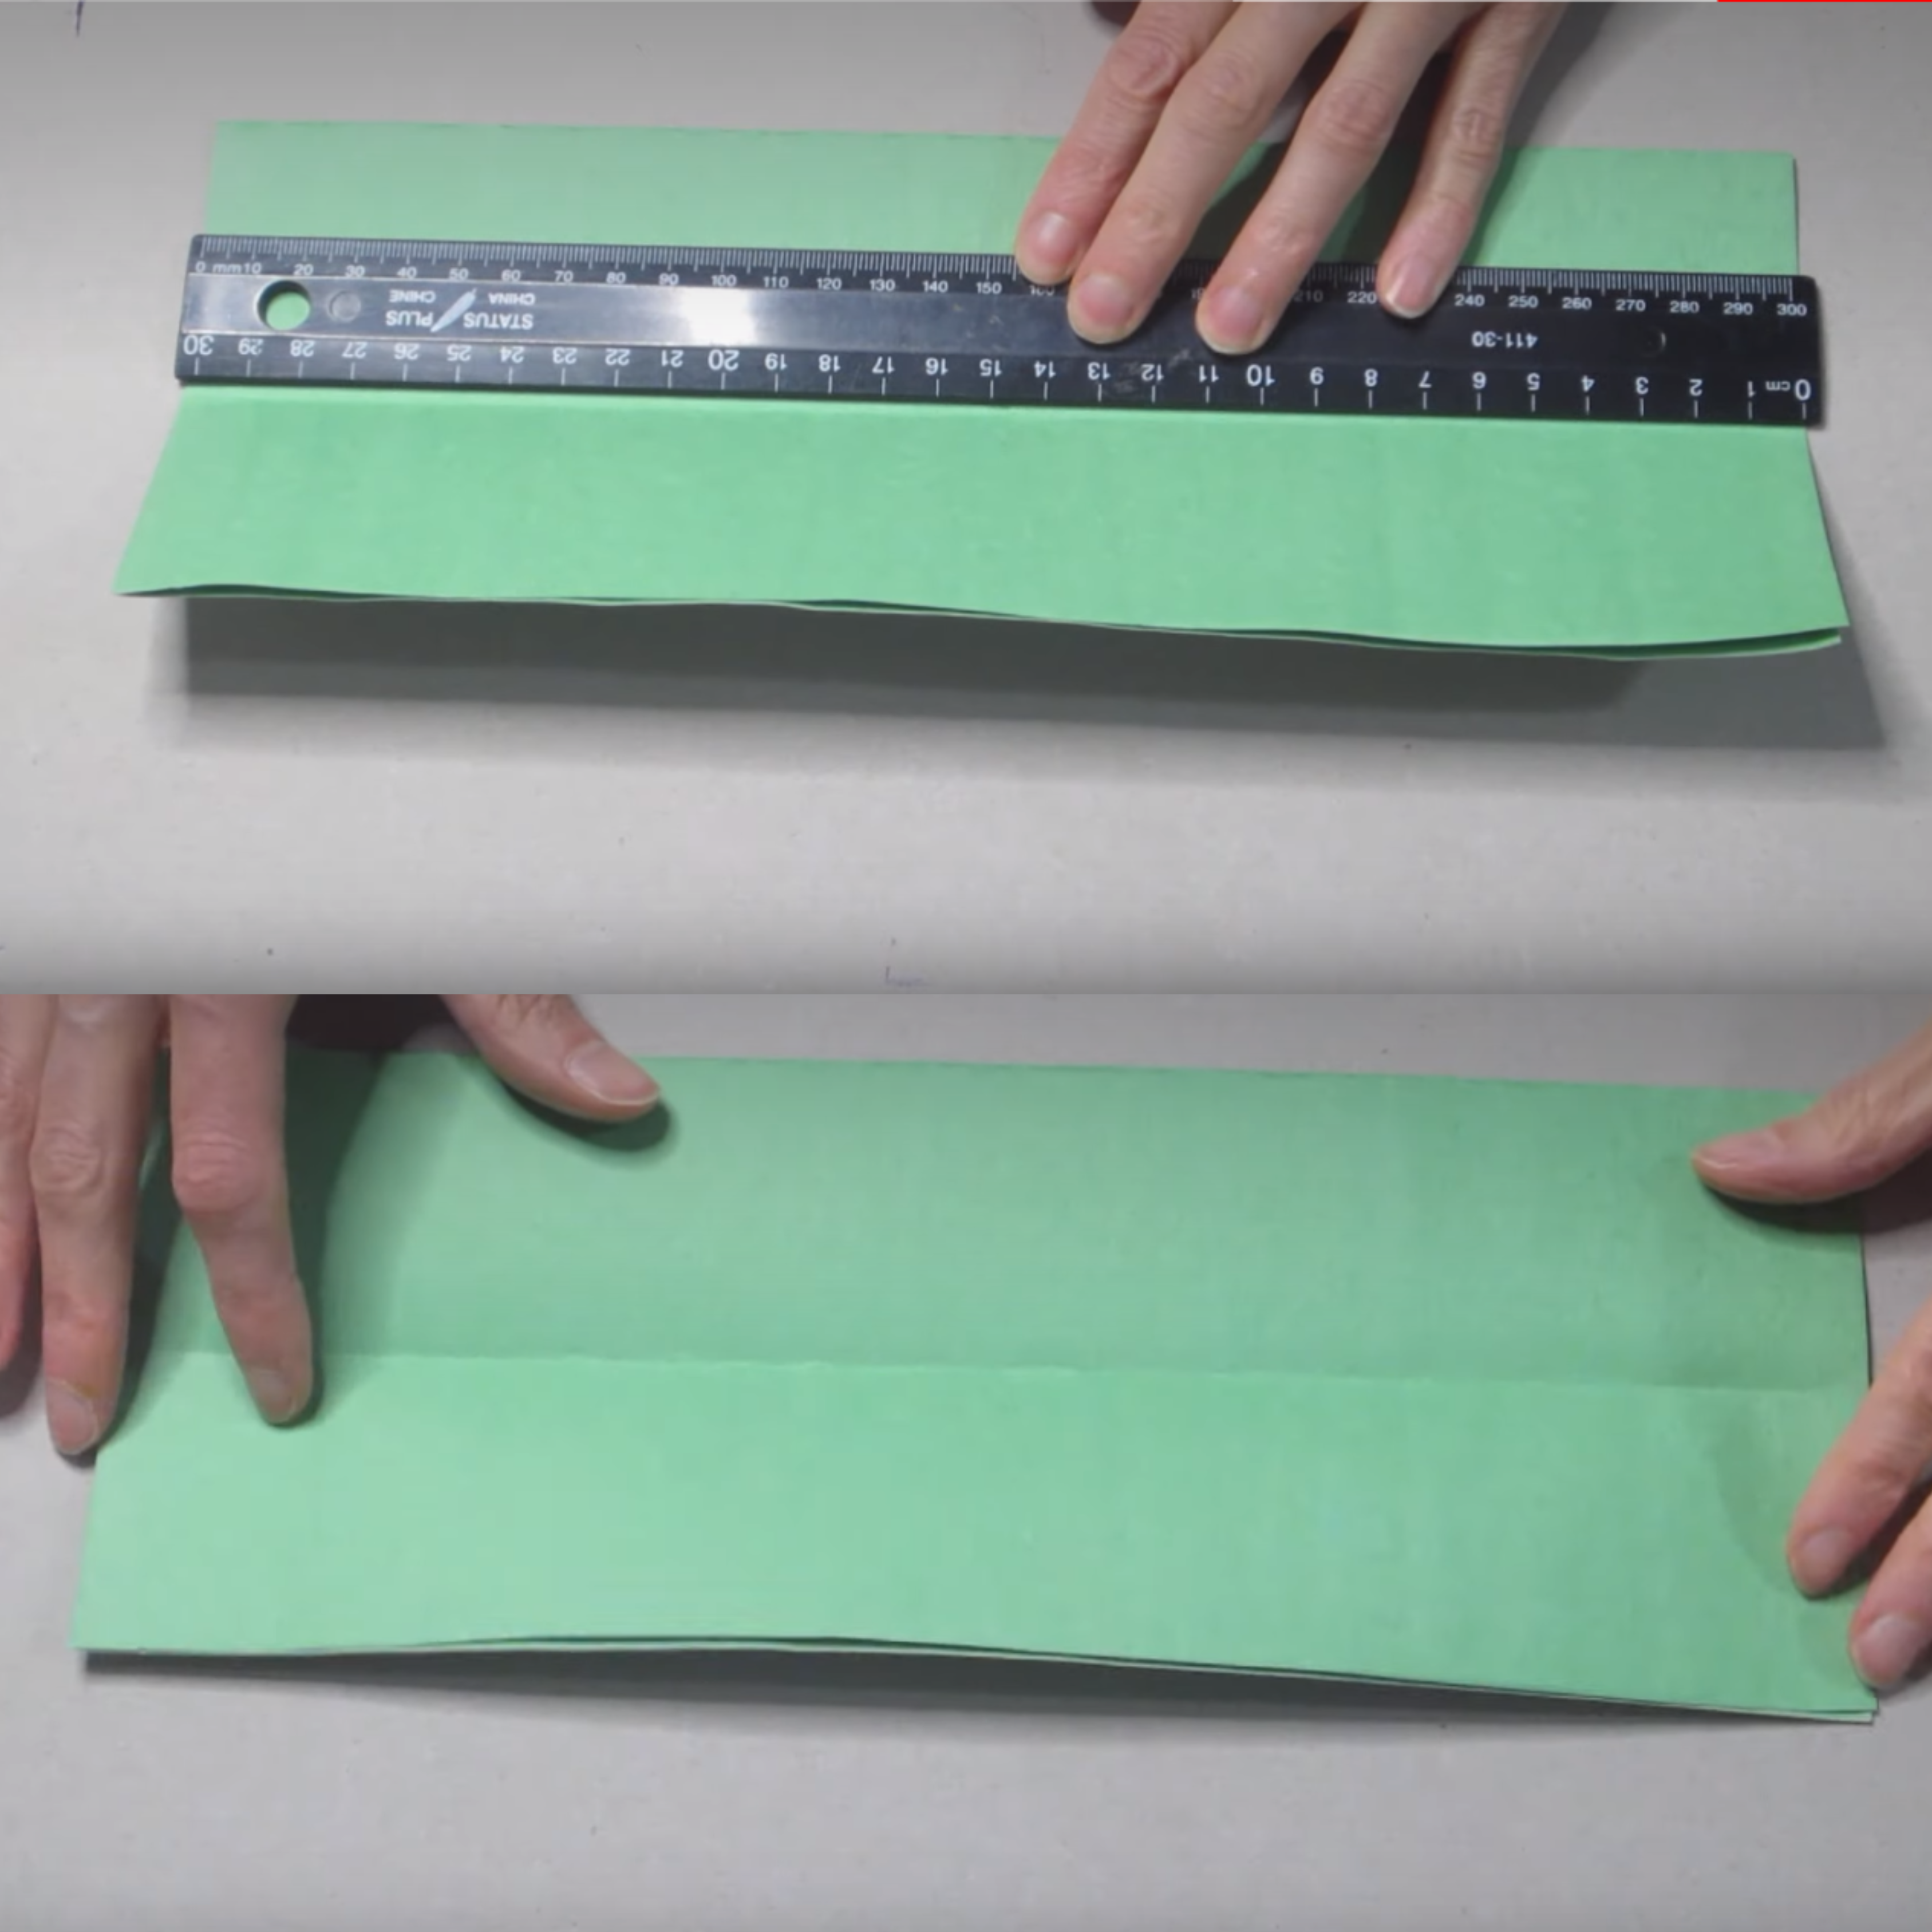 Folding the paper using a ruler